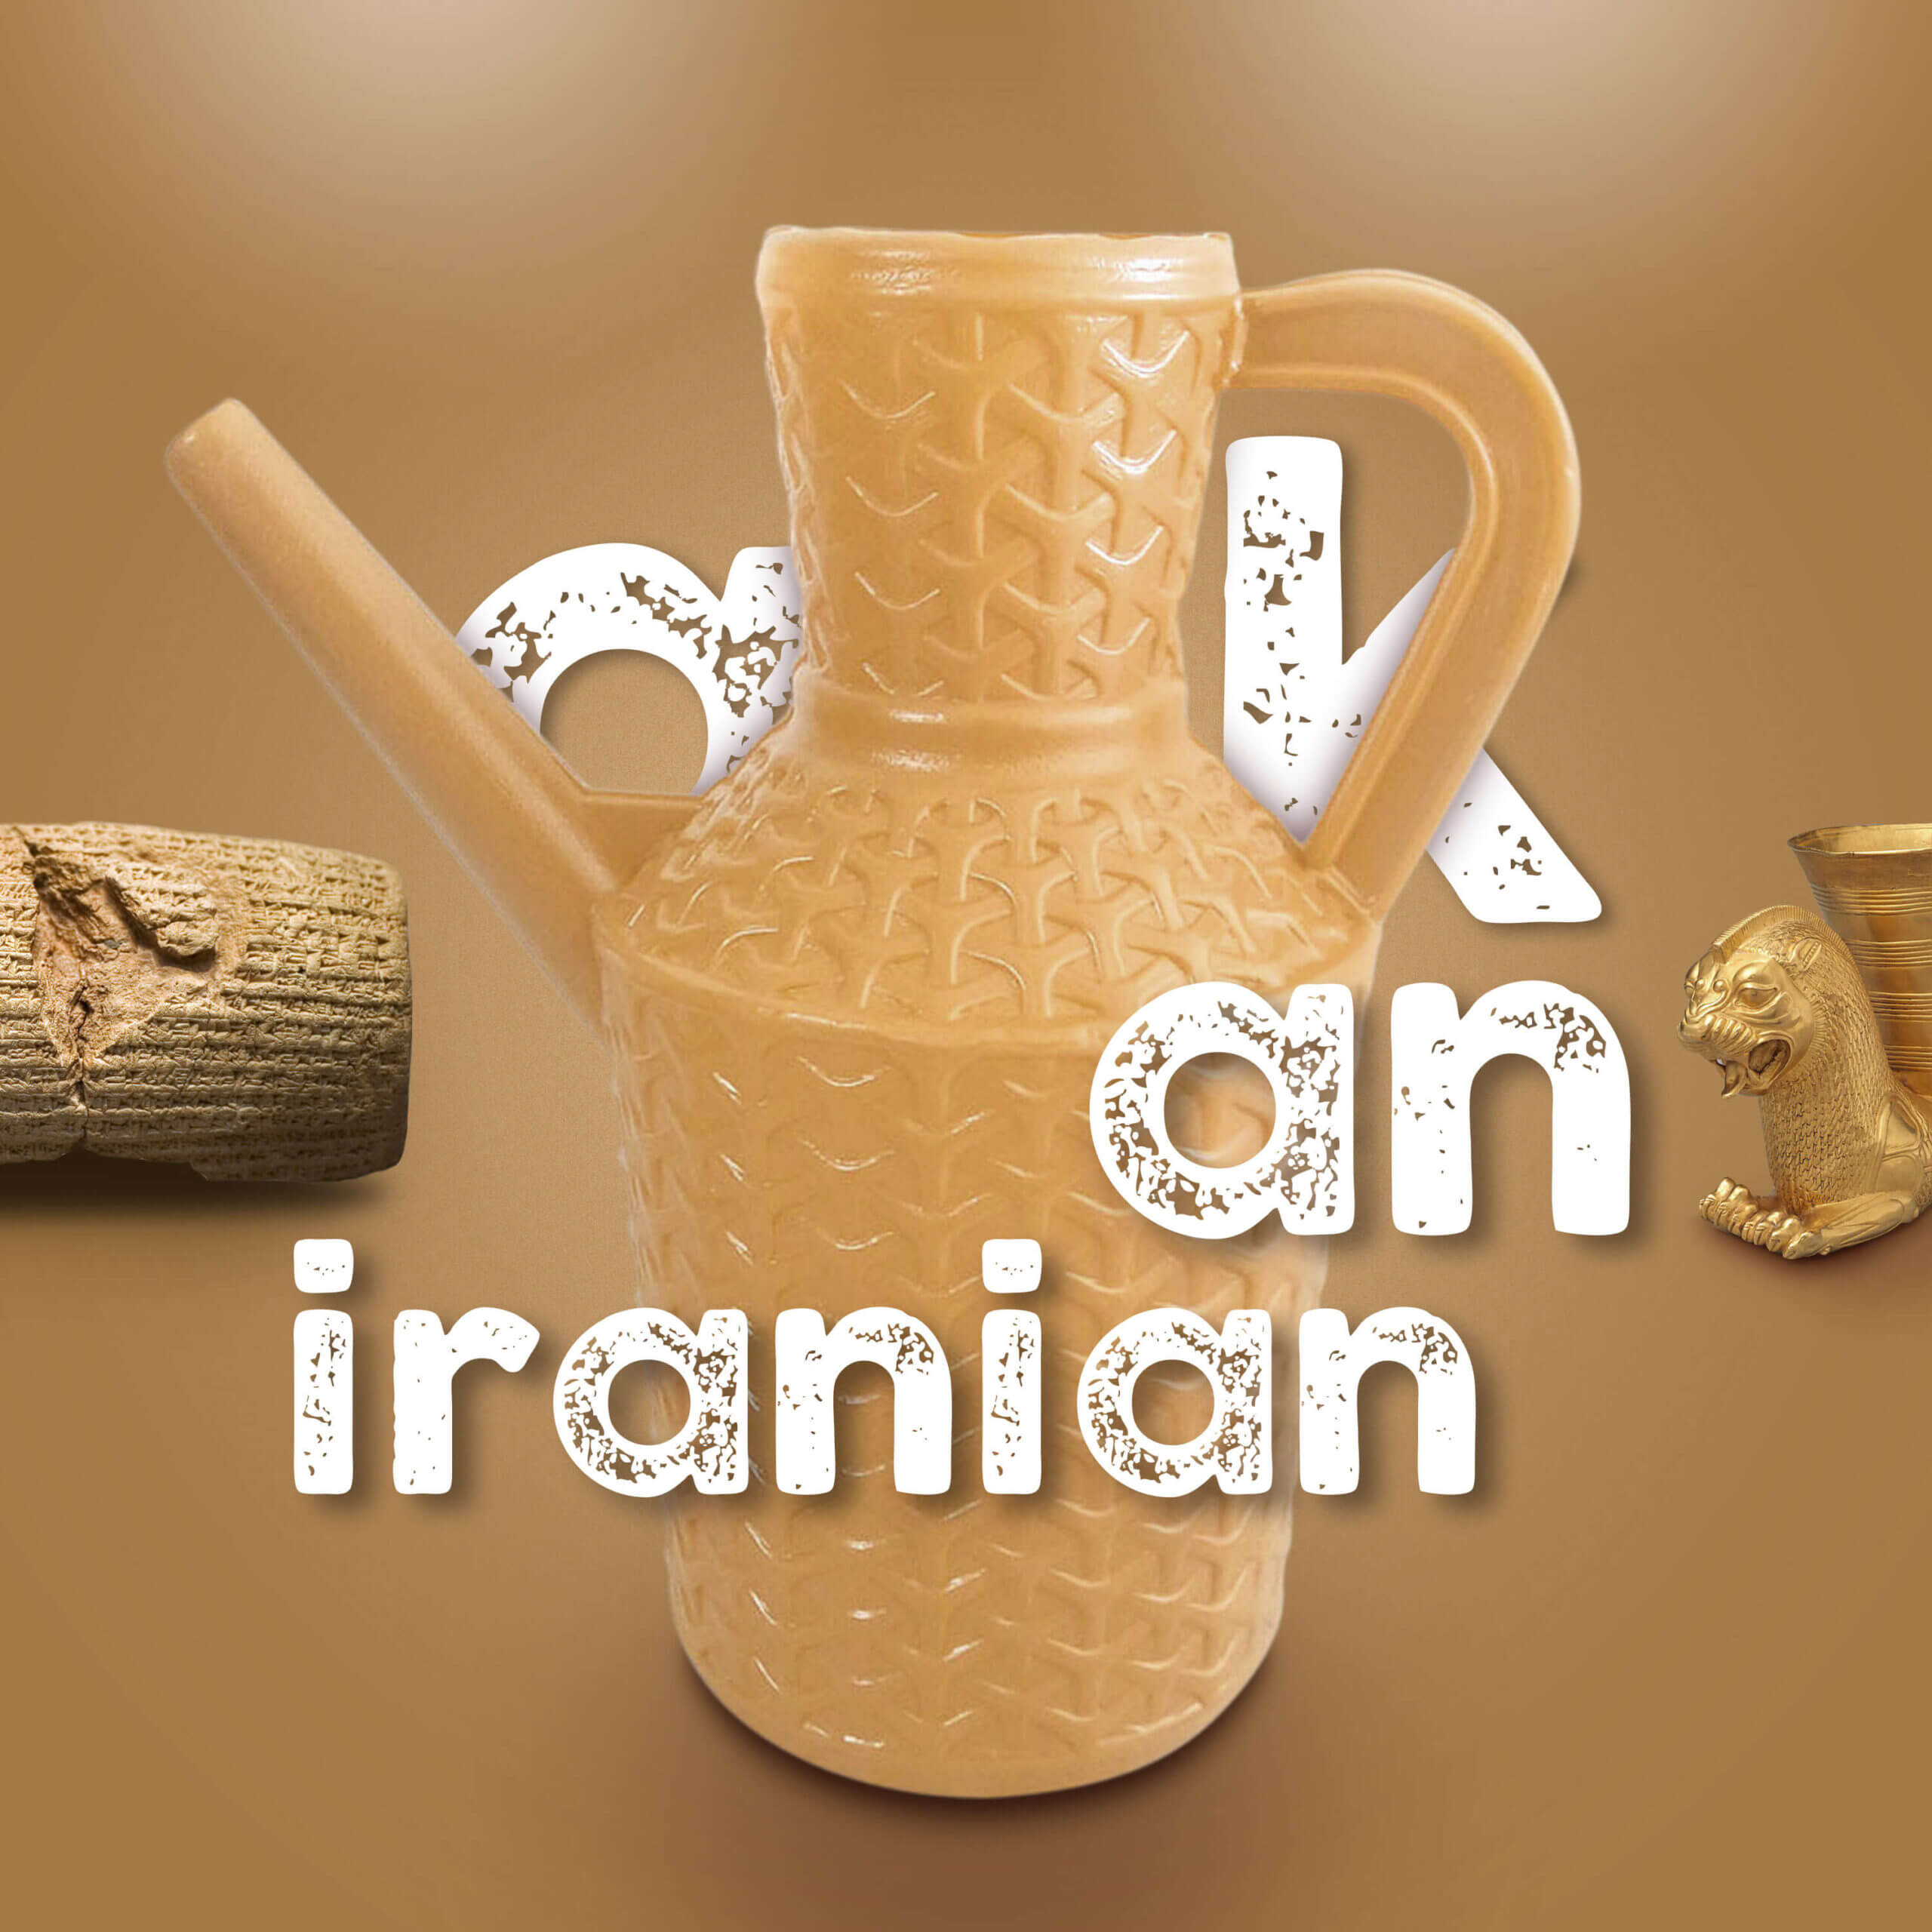 What is the most Iranian thing?